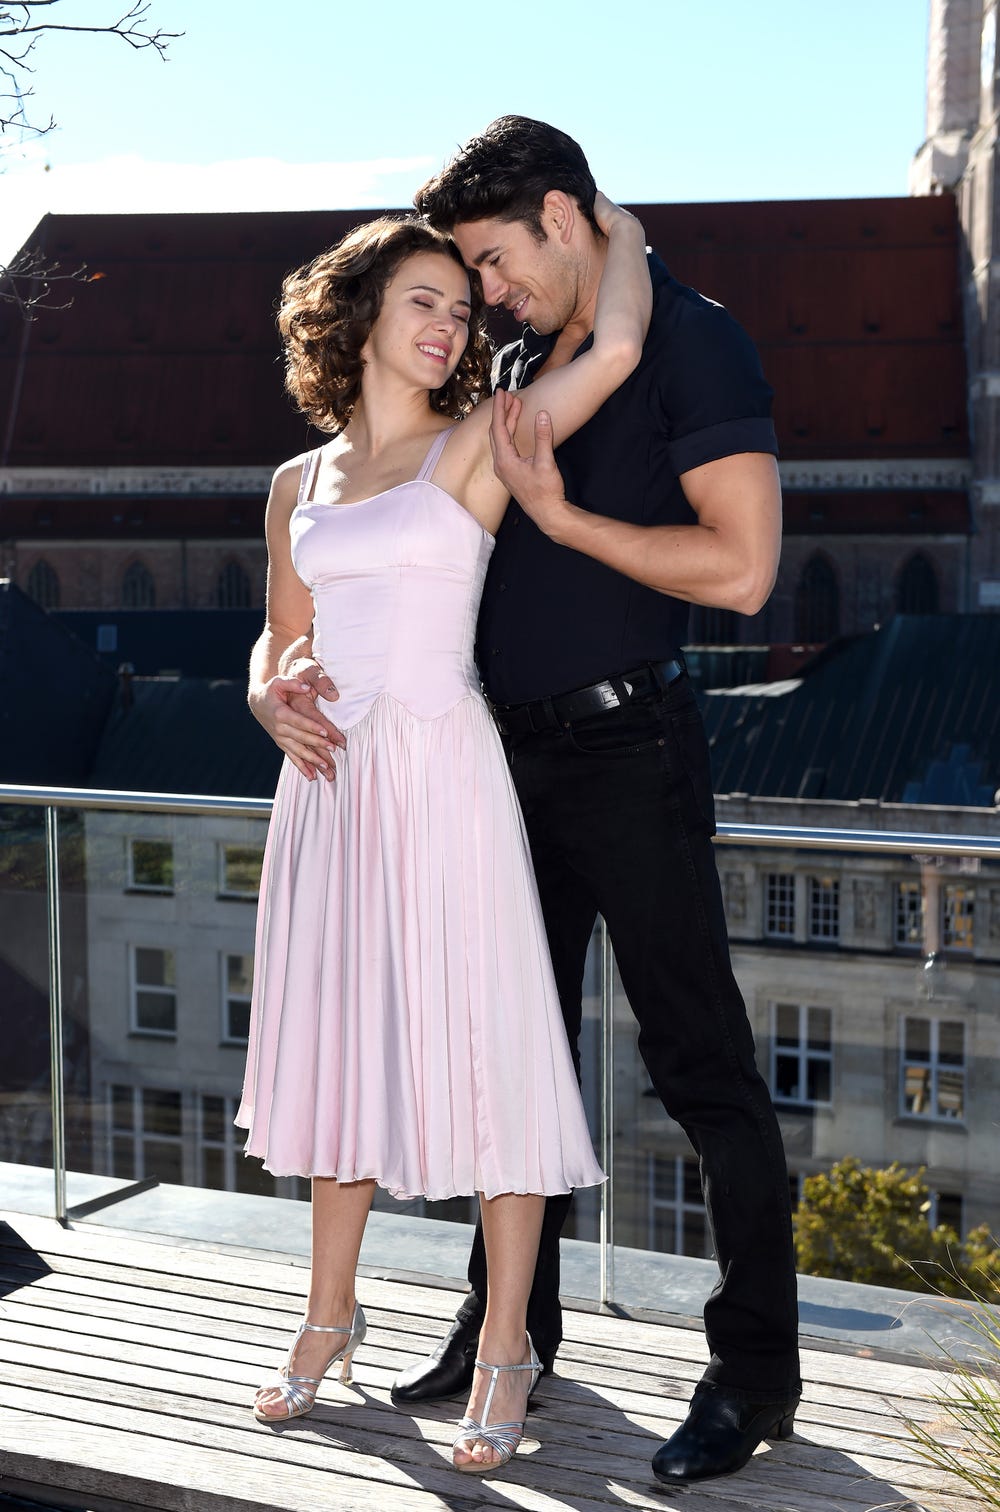 andres cavada add photo dirty dancing costume